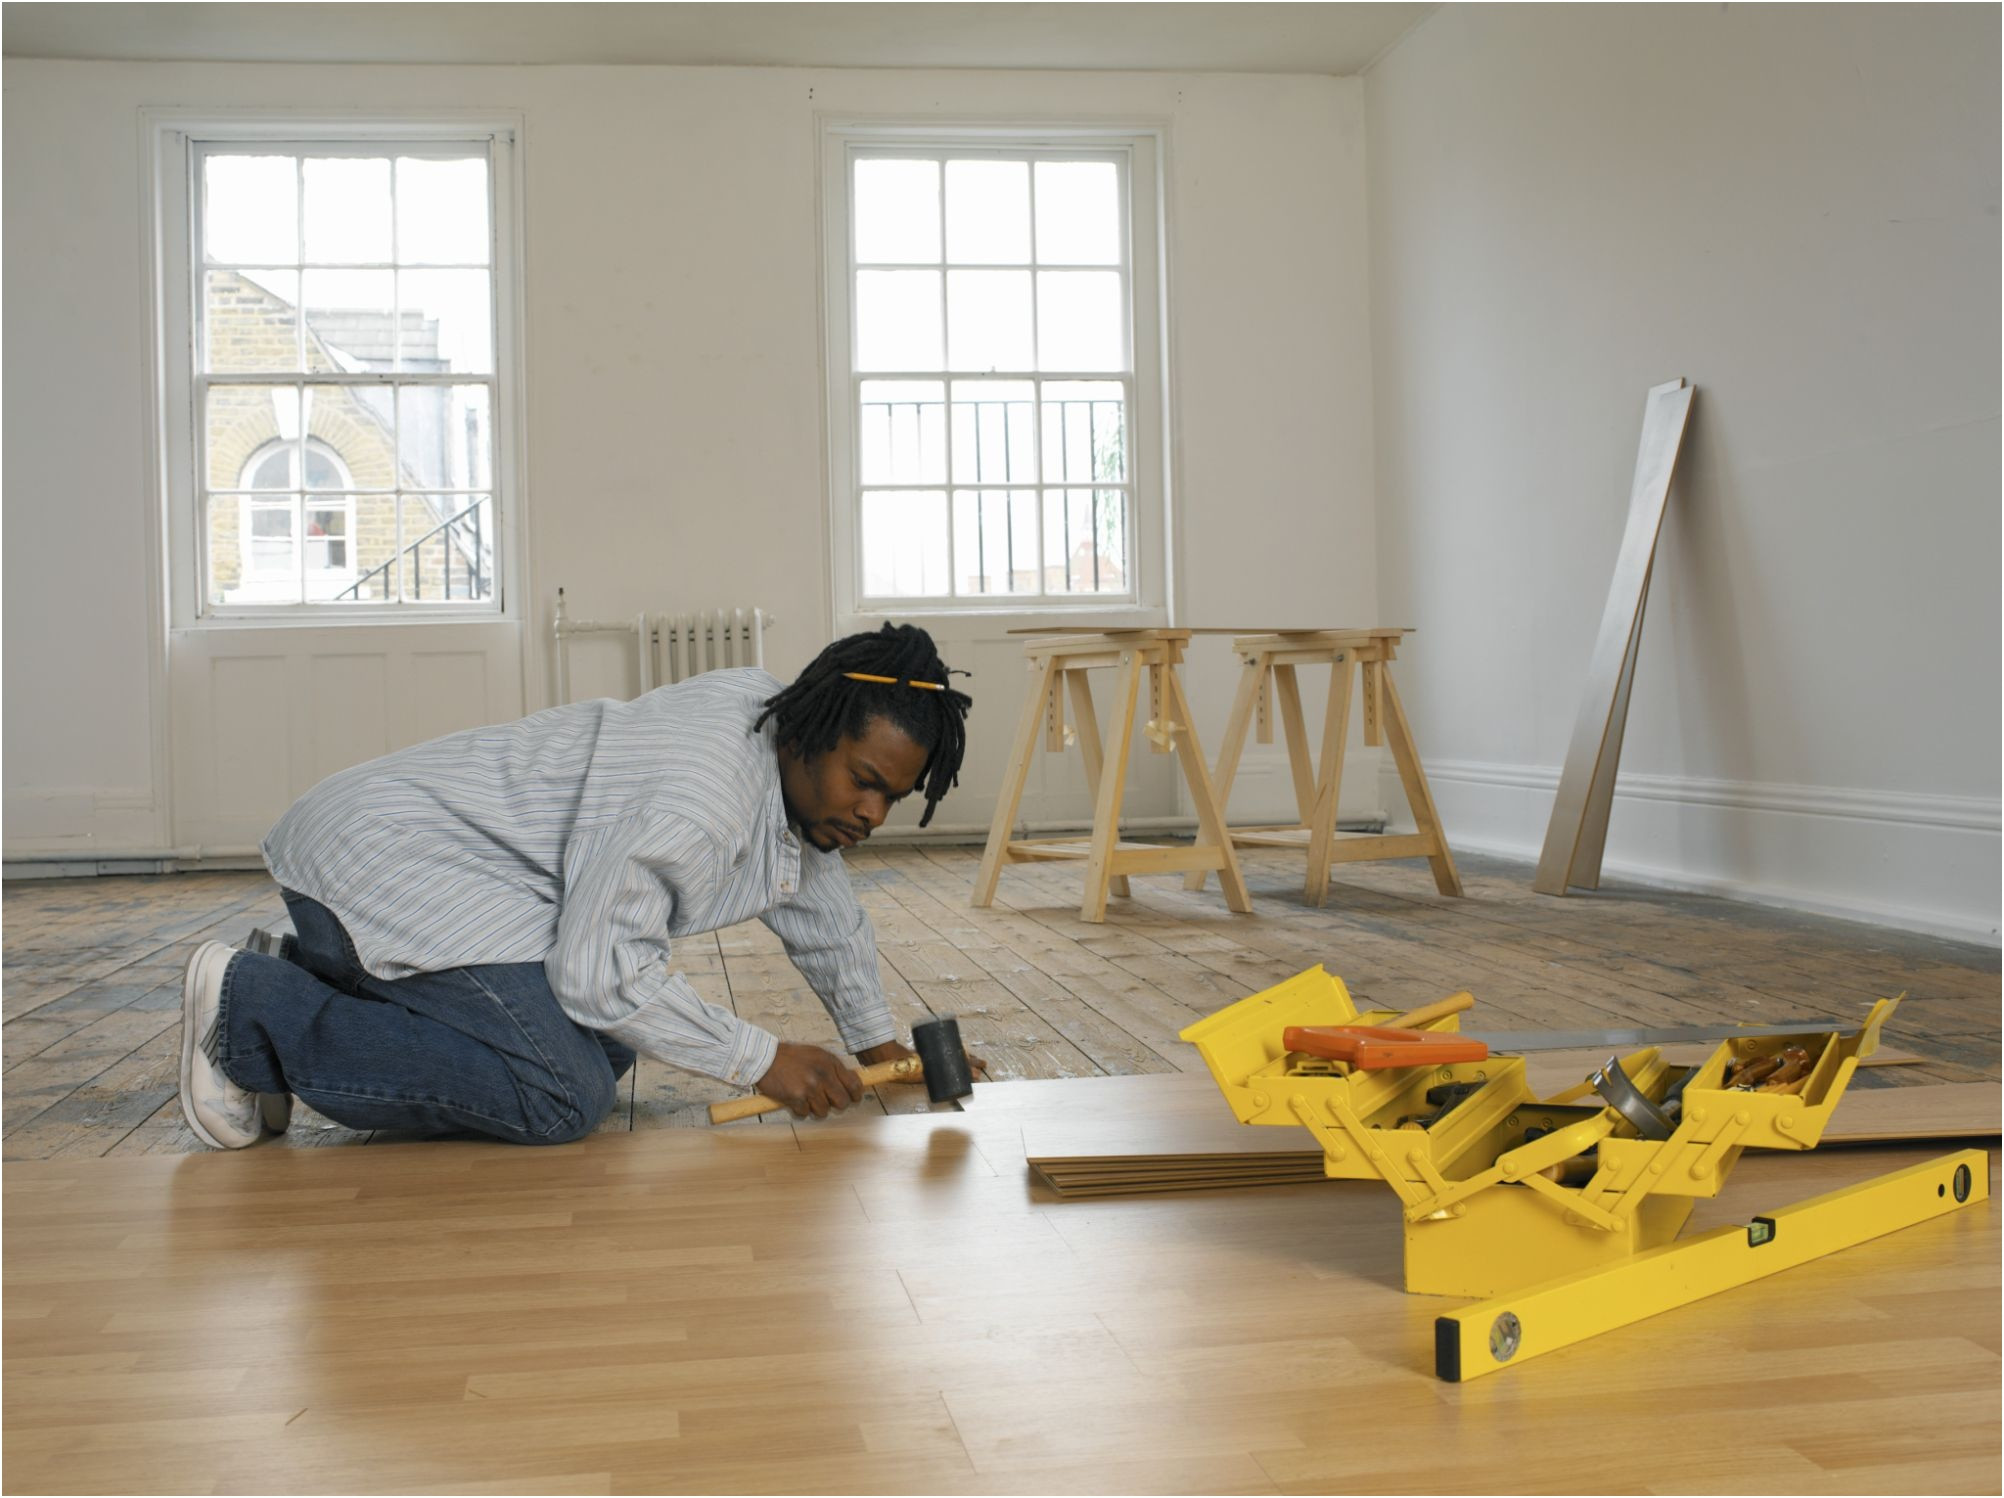 Hardwood Floor Underlayment Noise Reduction Of How Hard is It to Put In Laminate Flooring How Floor Underlayment for How Hard is It to Put In Laminate Flooring Images Professional Laminate Floor Installations Of How